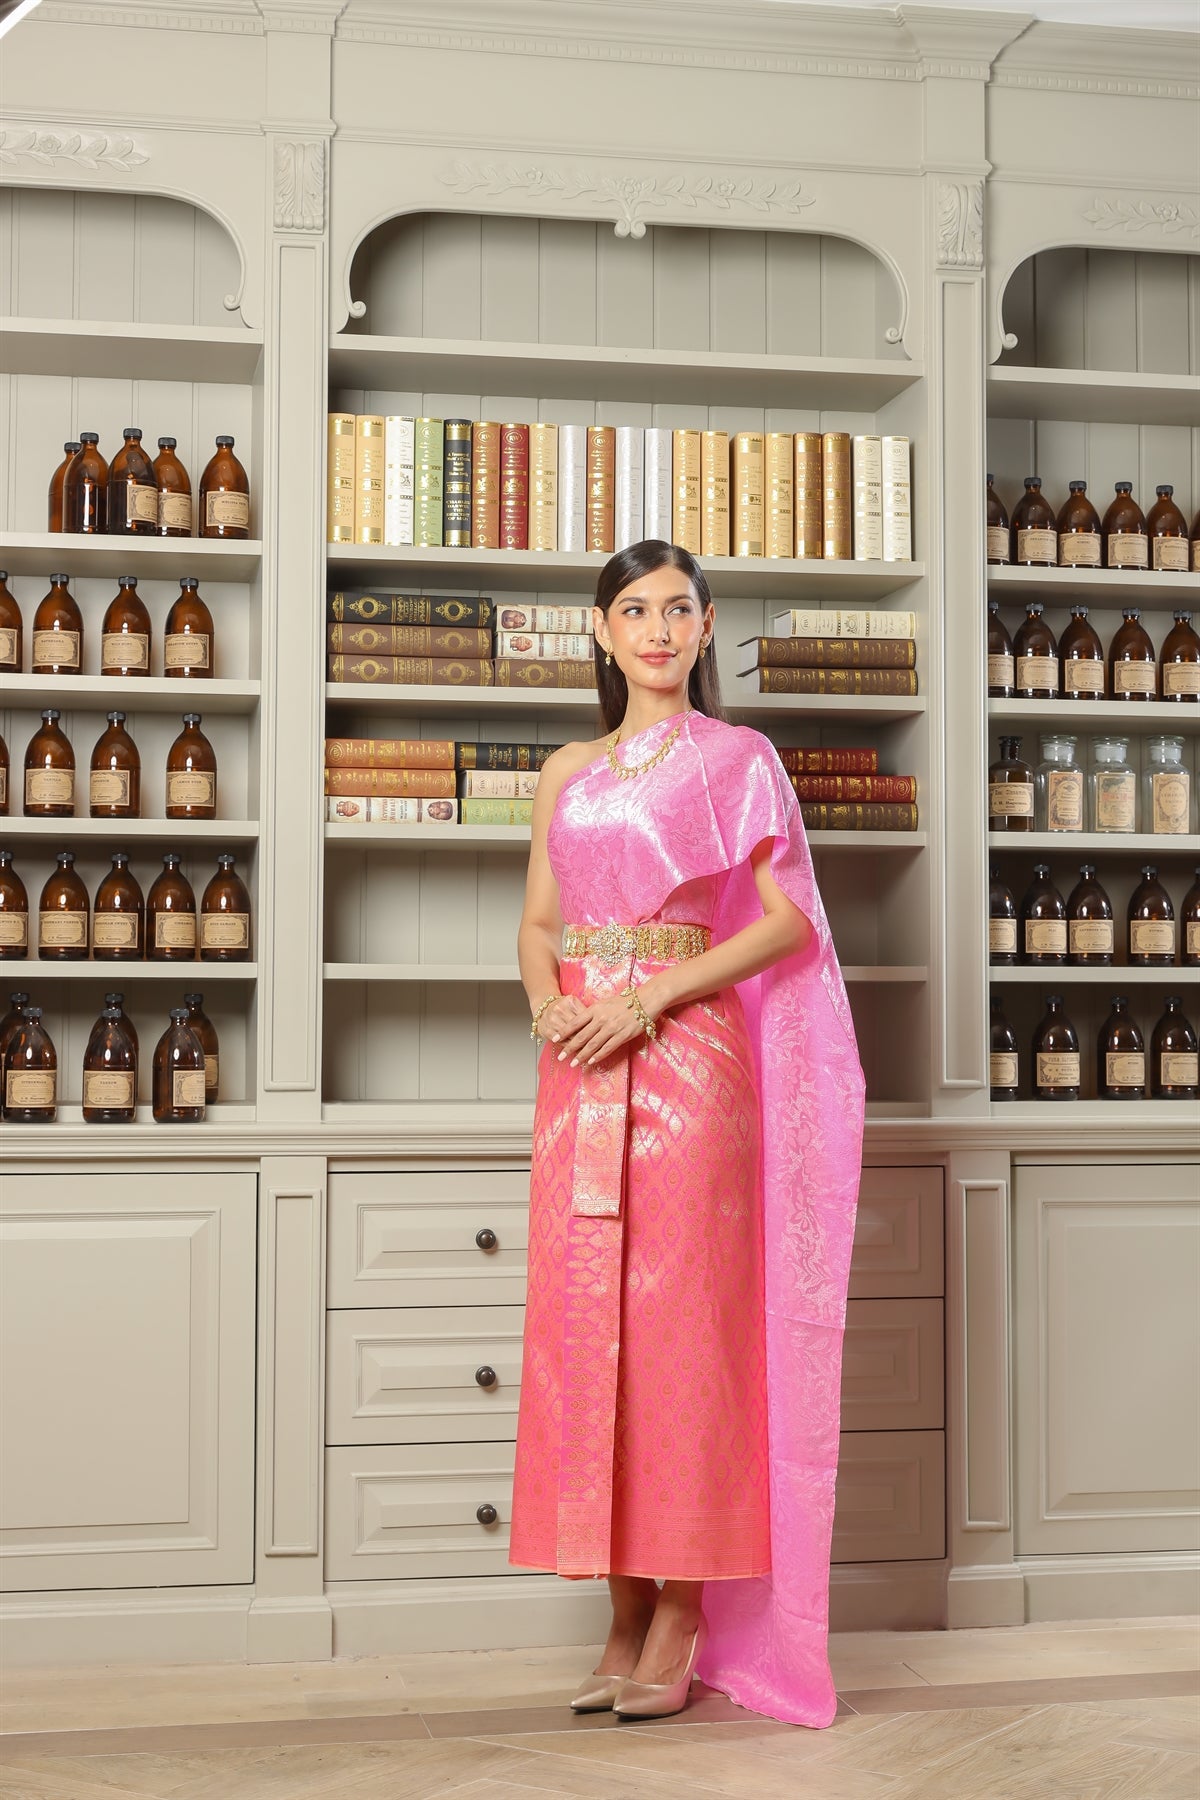 Our traditional Thai clothing in a flirty pink color.